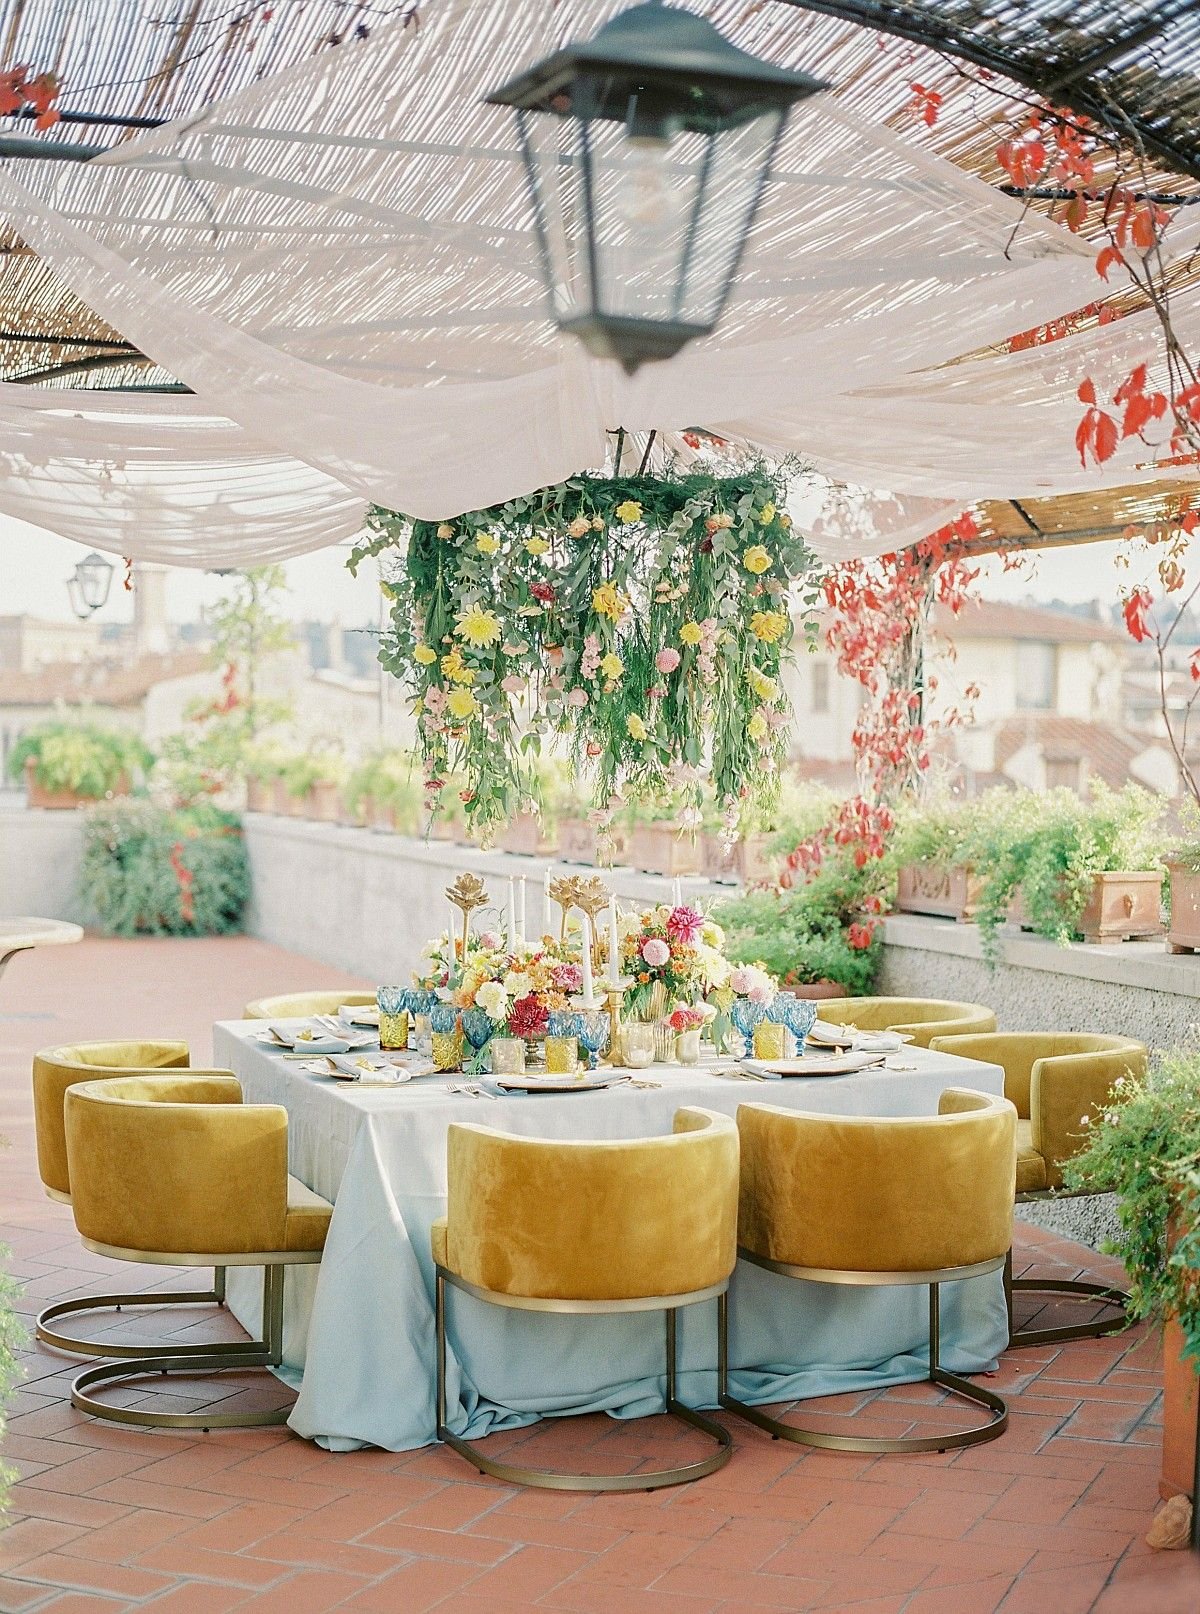 Bold & Colorful Rooftop Wedding Ideas - Anna Gianfrate.jpg